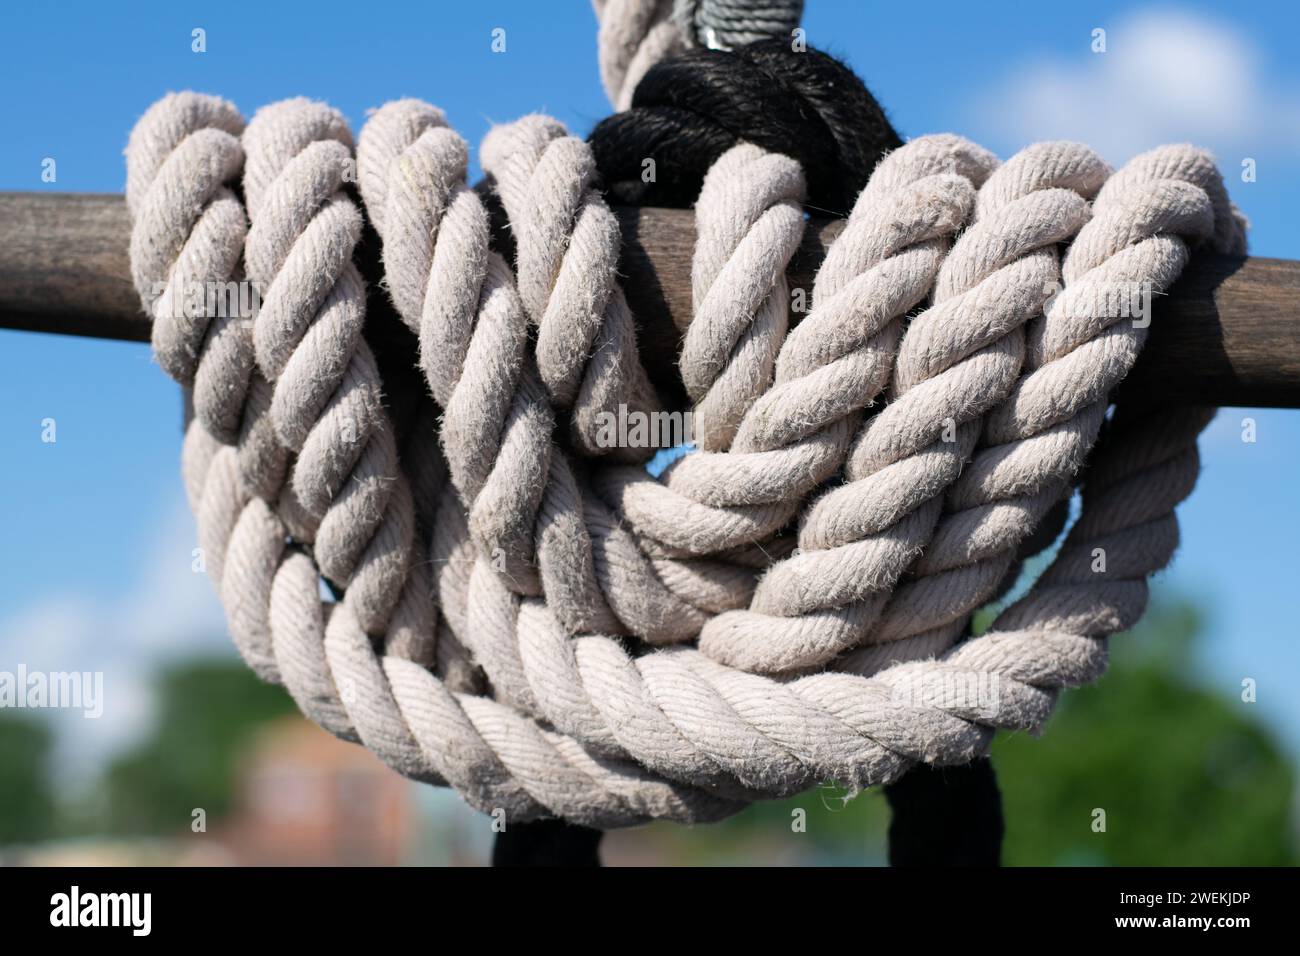 A thick, white rope is expertly coiled around a sturdy mooring post, contrasting against the vibrant blue sky of a calm day. Stock Photo